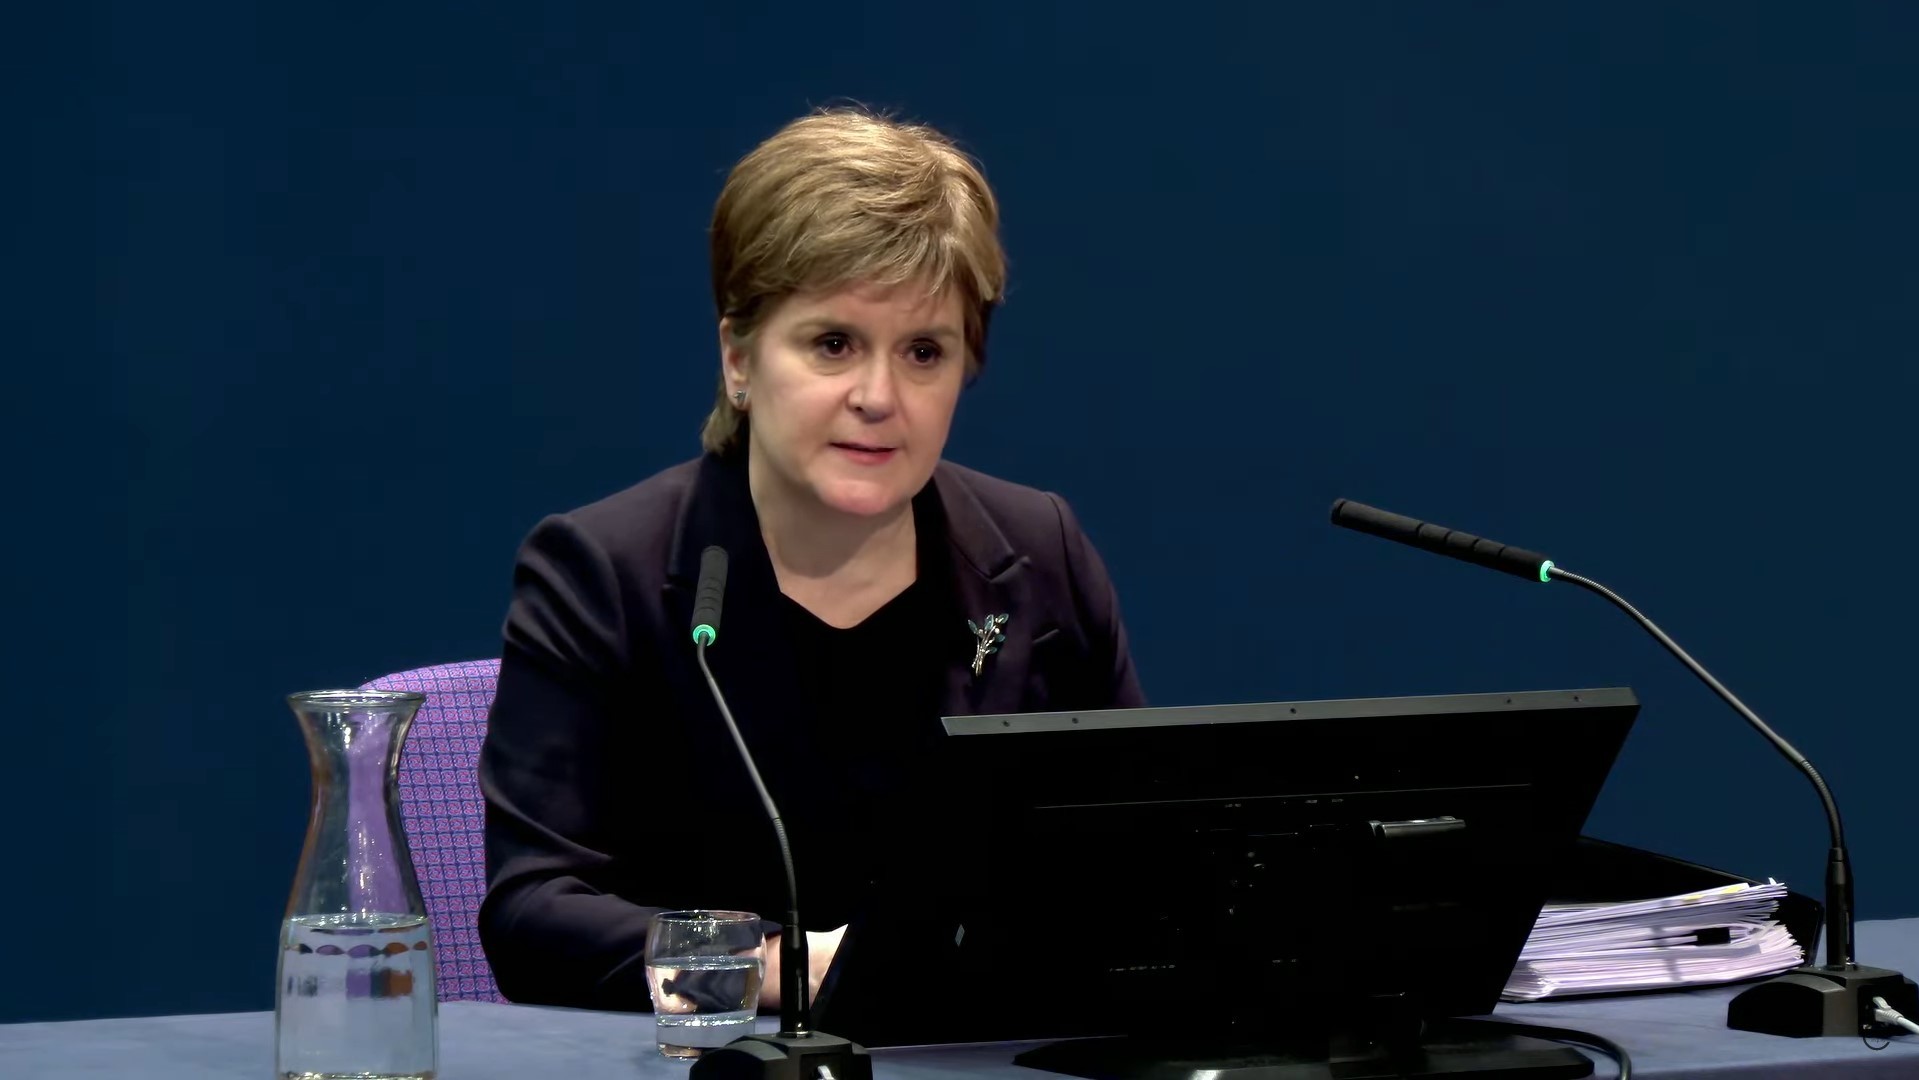 Nicola Sturgeon admitted deleting WhatsApp messages during the pandemic but denied allegations of secrecy.